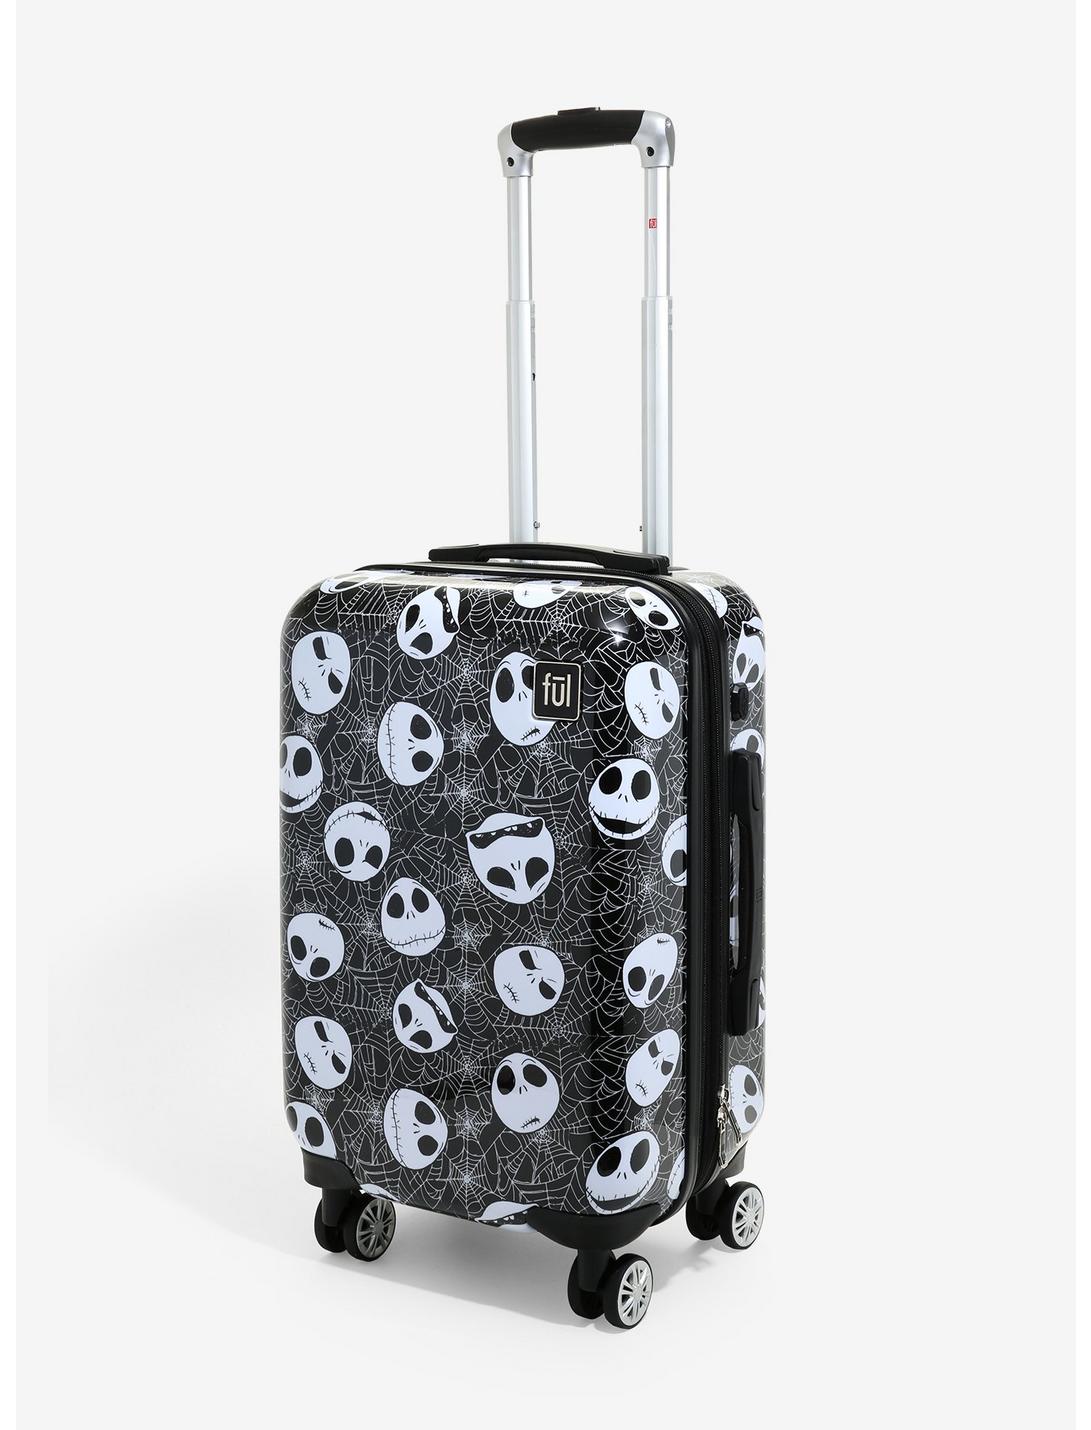 FUL The Nightmare Before Christmas Jack Head Hard-Sided 21 Inch Carry-On Rolling Luggage, , hi-res